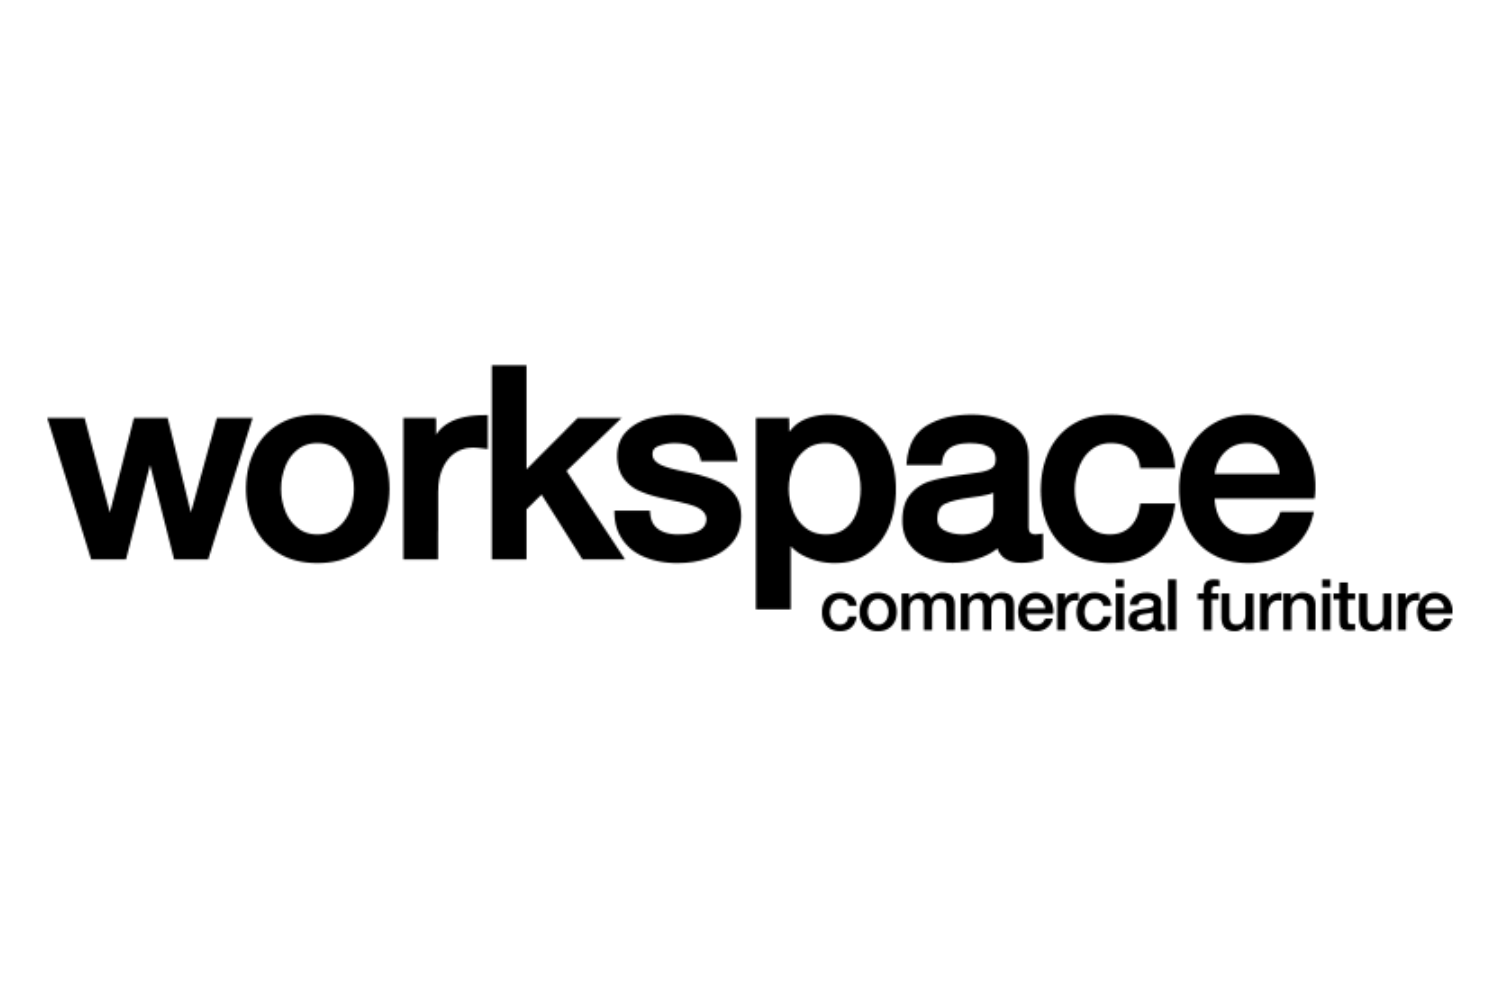 Meet The Manufacturer - Workspace Commercial Furniture